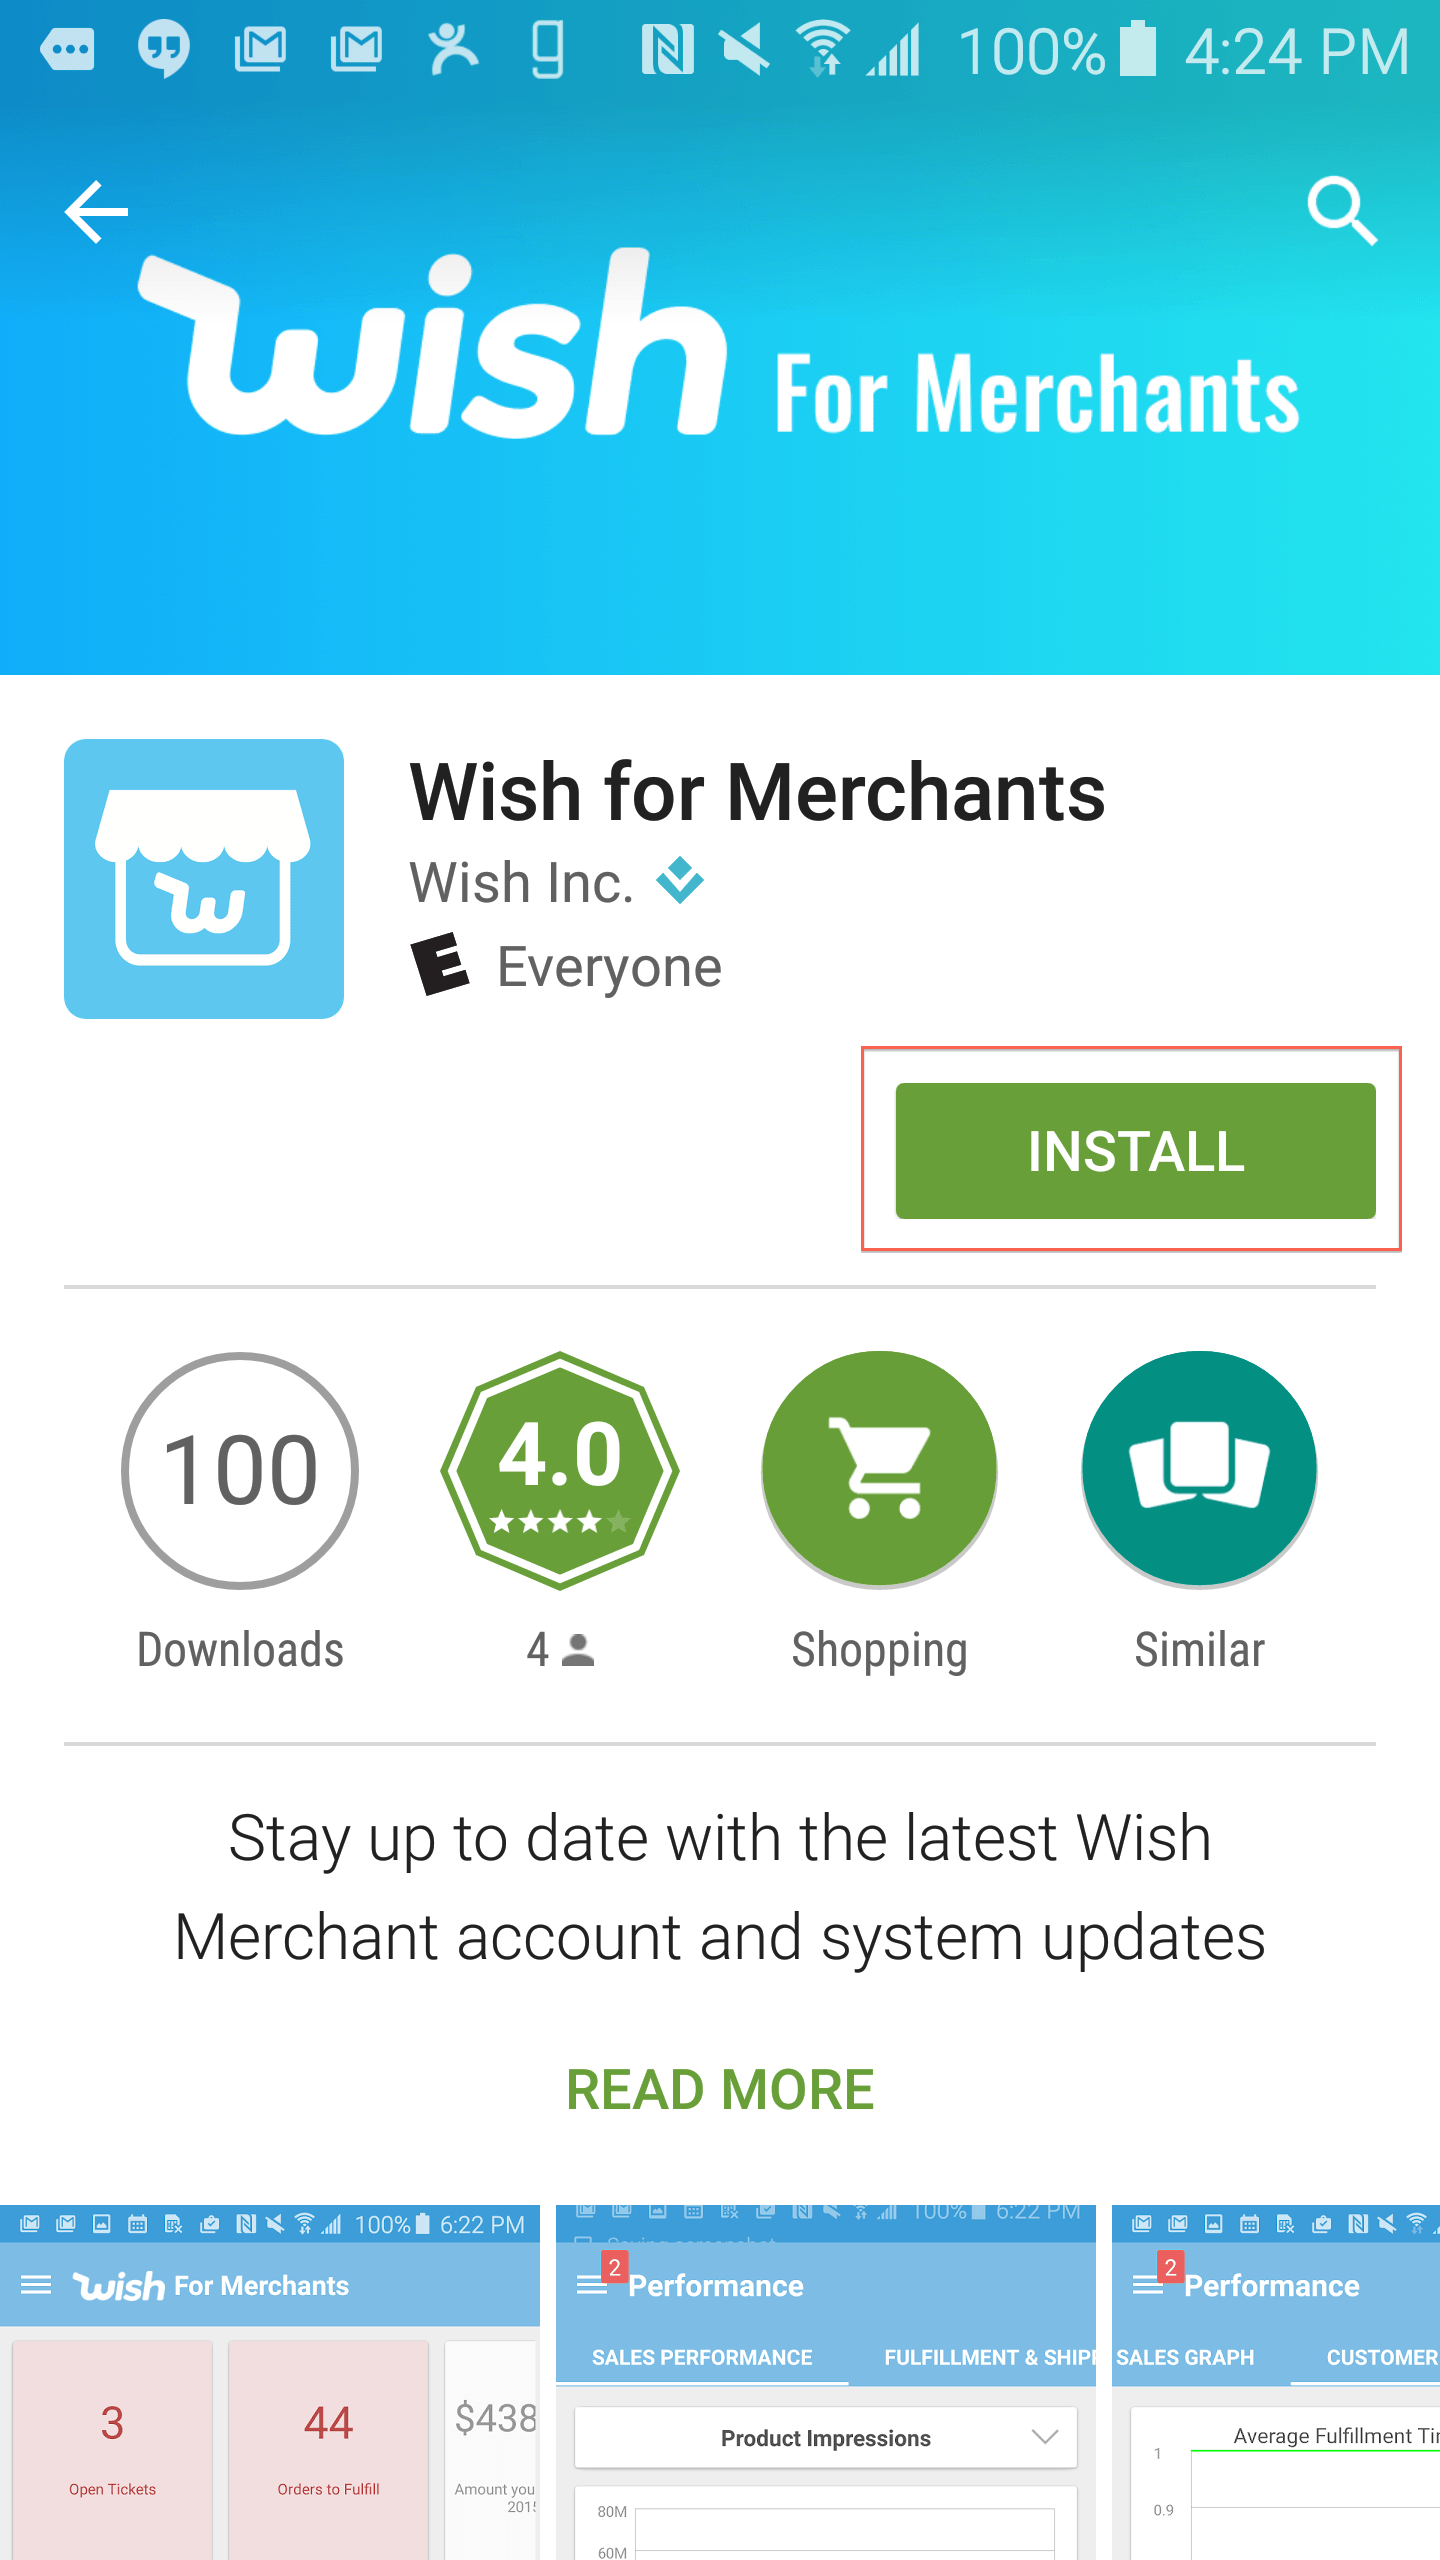 Wish.com Logo - How to Download and Install the Merchant App – Wish for Merchants